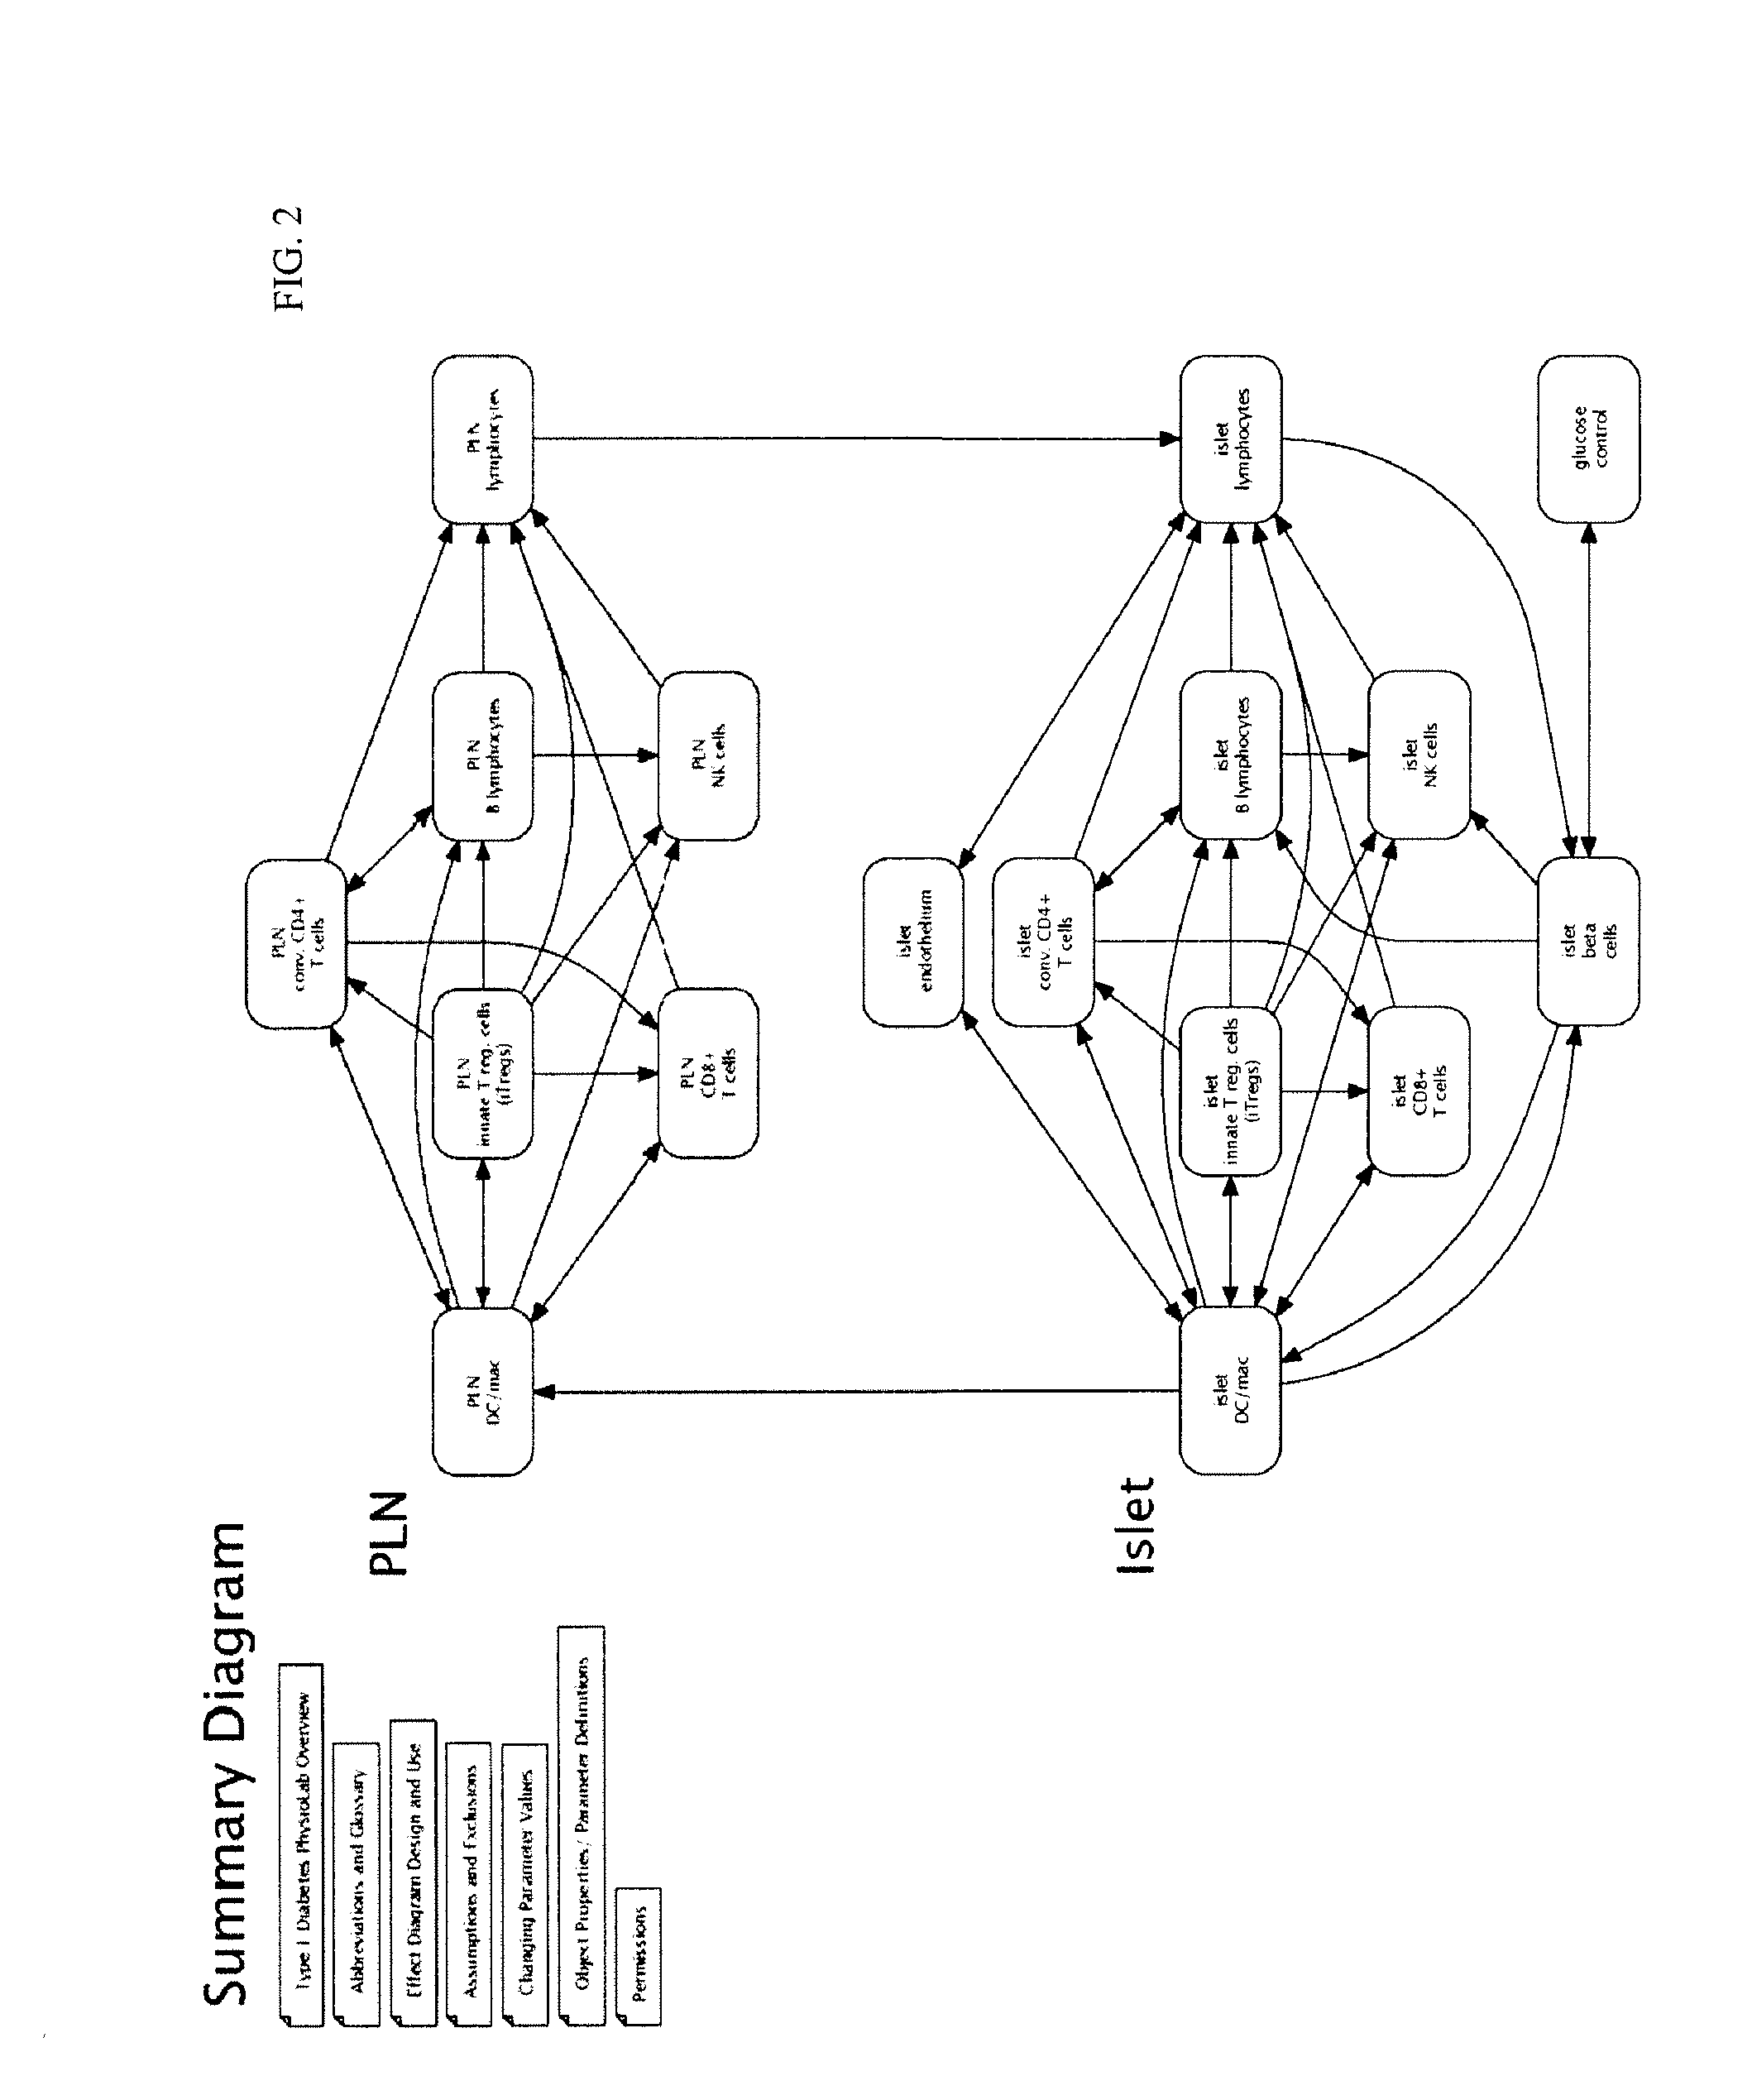 Apparatus and method for computer modeling type 1 diabetes